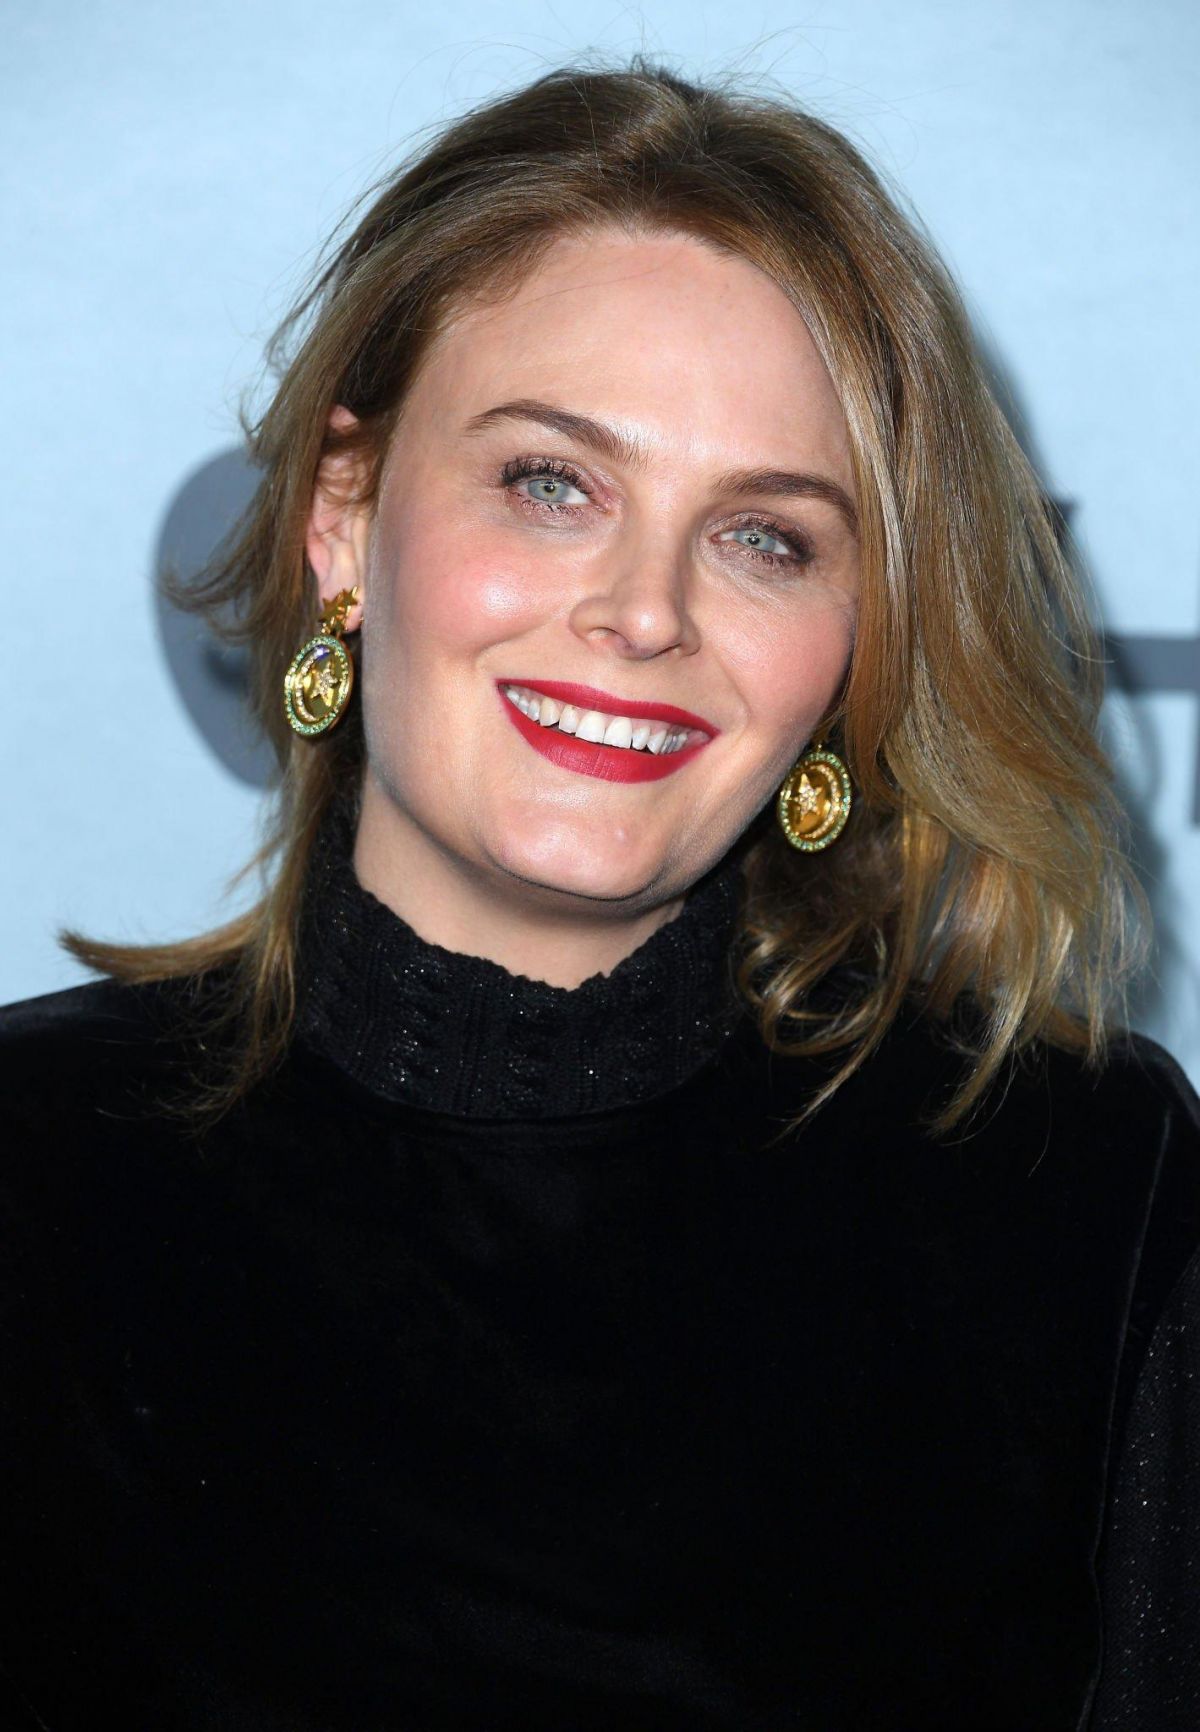 Emily Deschanel At Shrinking Premiere At Directors Guild Of America In Los Angeles 01 26 2023 6 